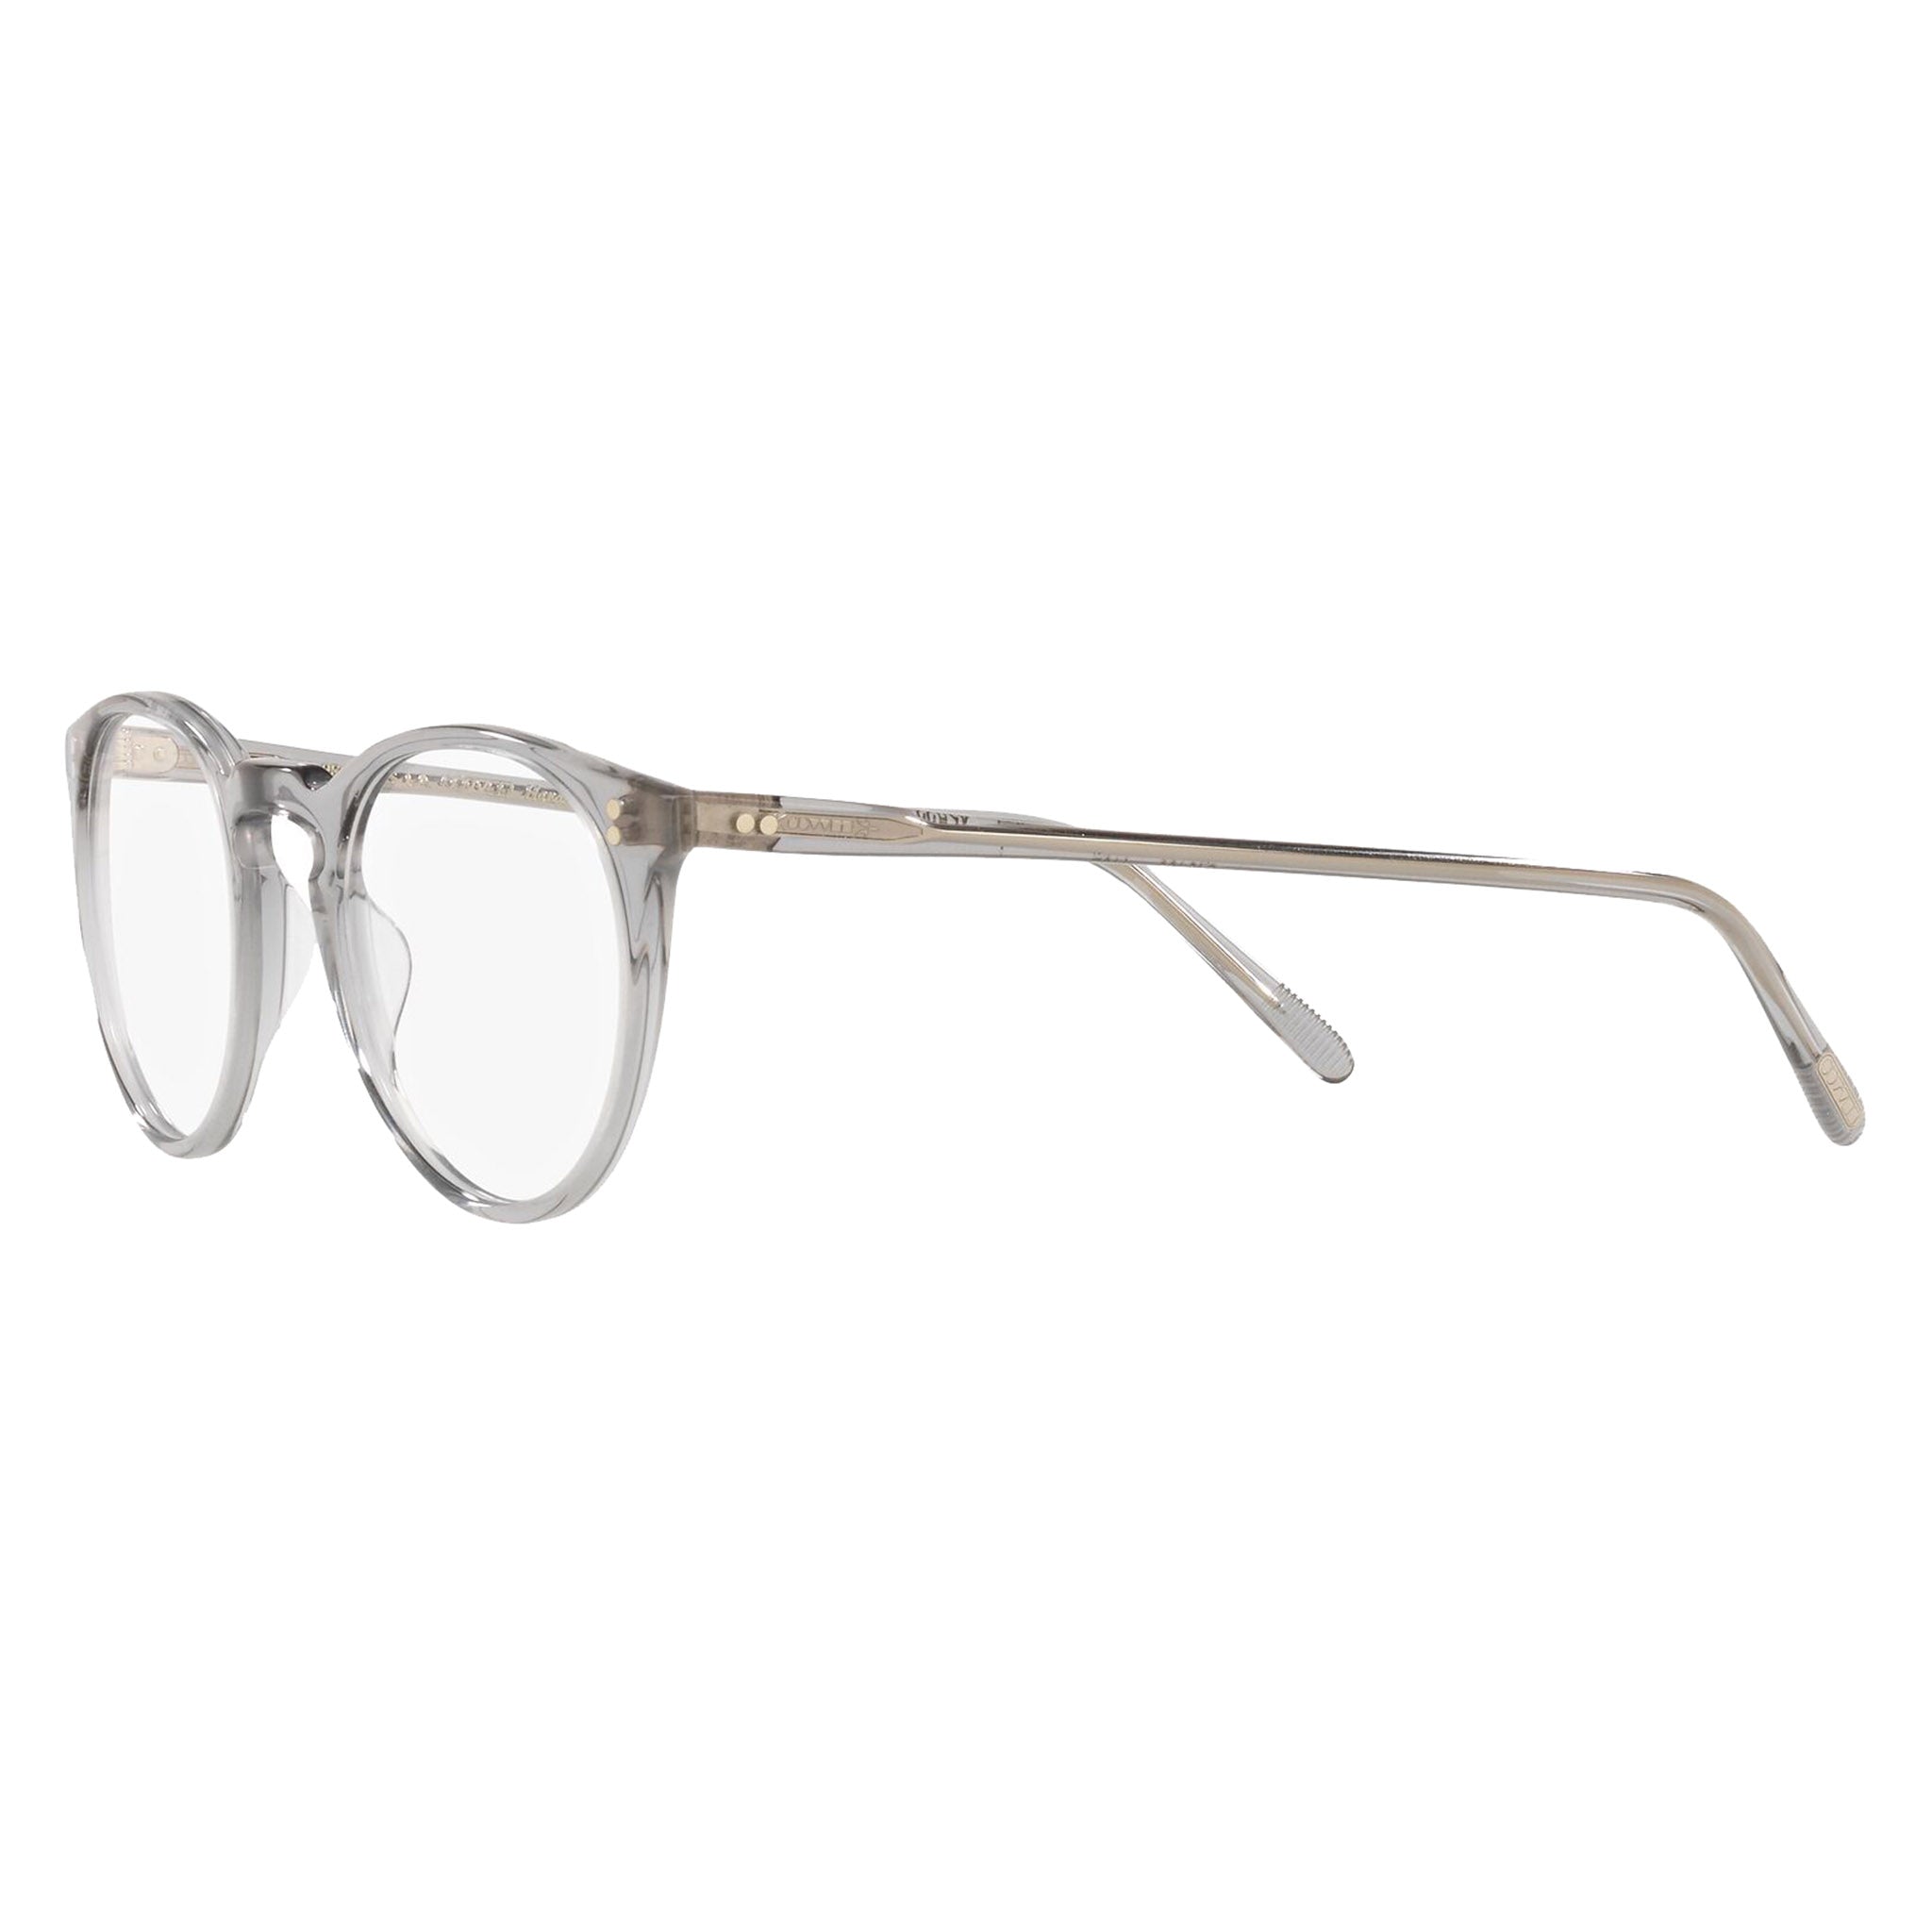 Oliver Peoples O'Malley Workman Grey Rx